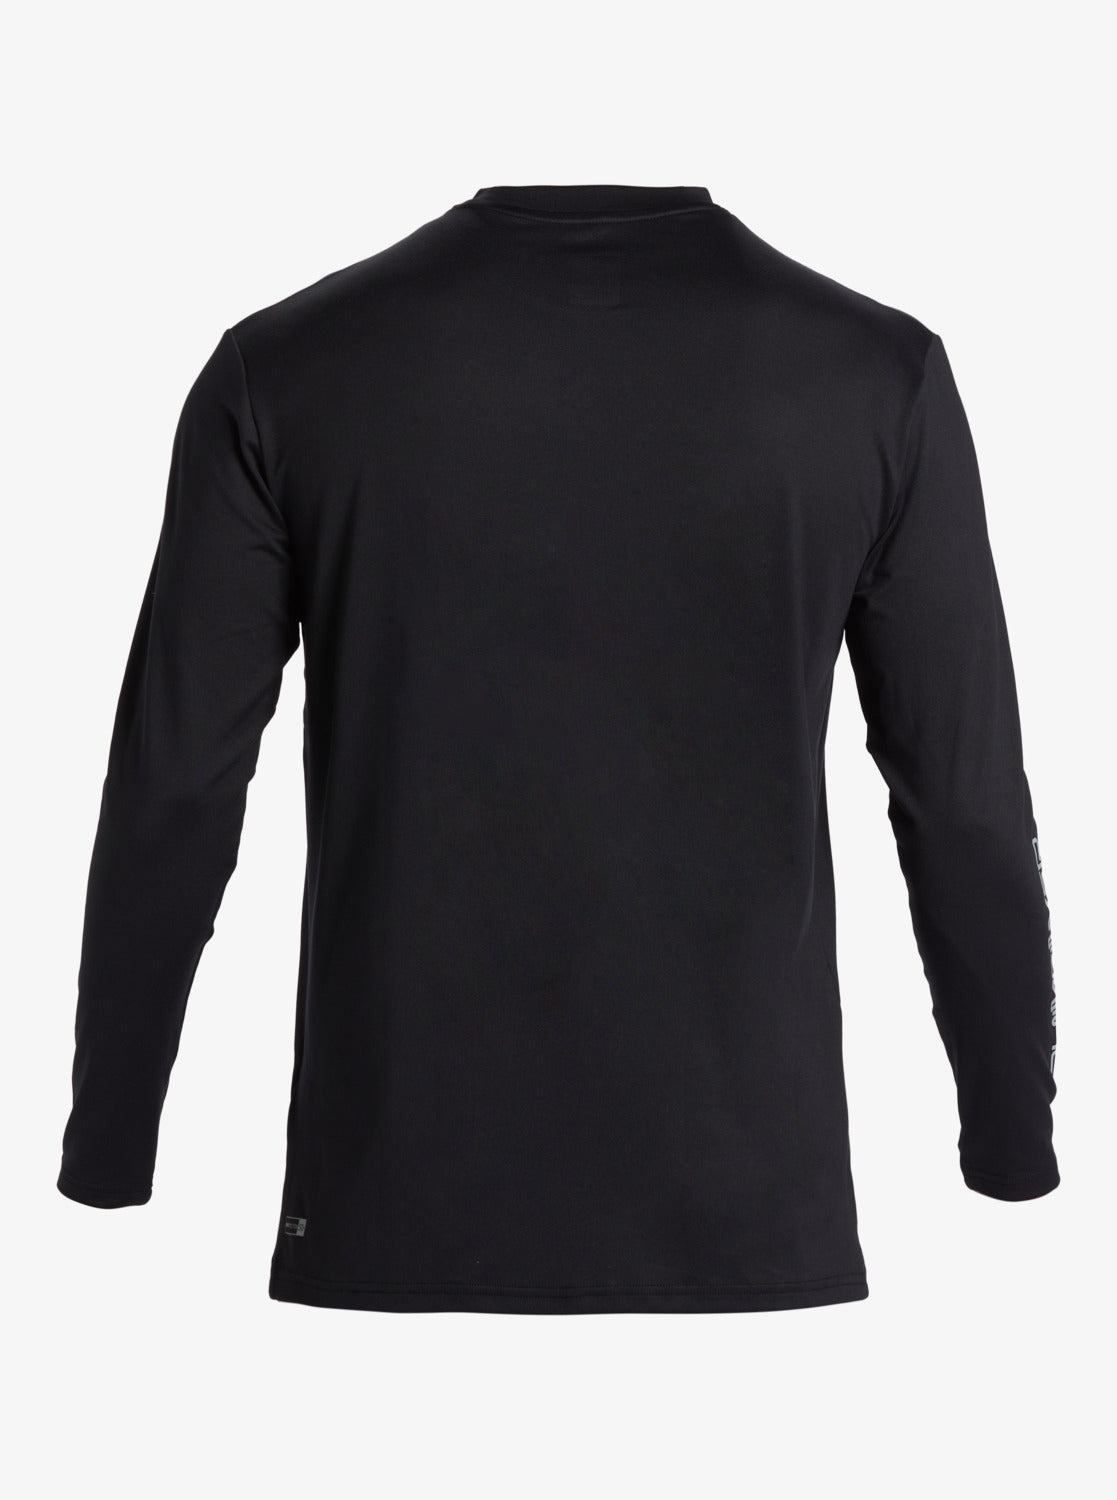 Quiksilver Everyday Surf - Long Sleeve UPF 50 Surf T-Shirt for Men in Black